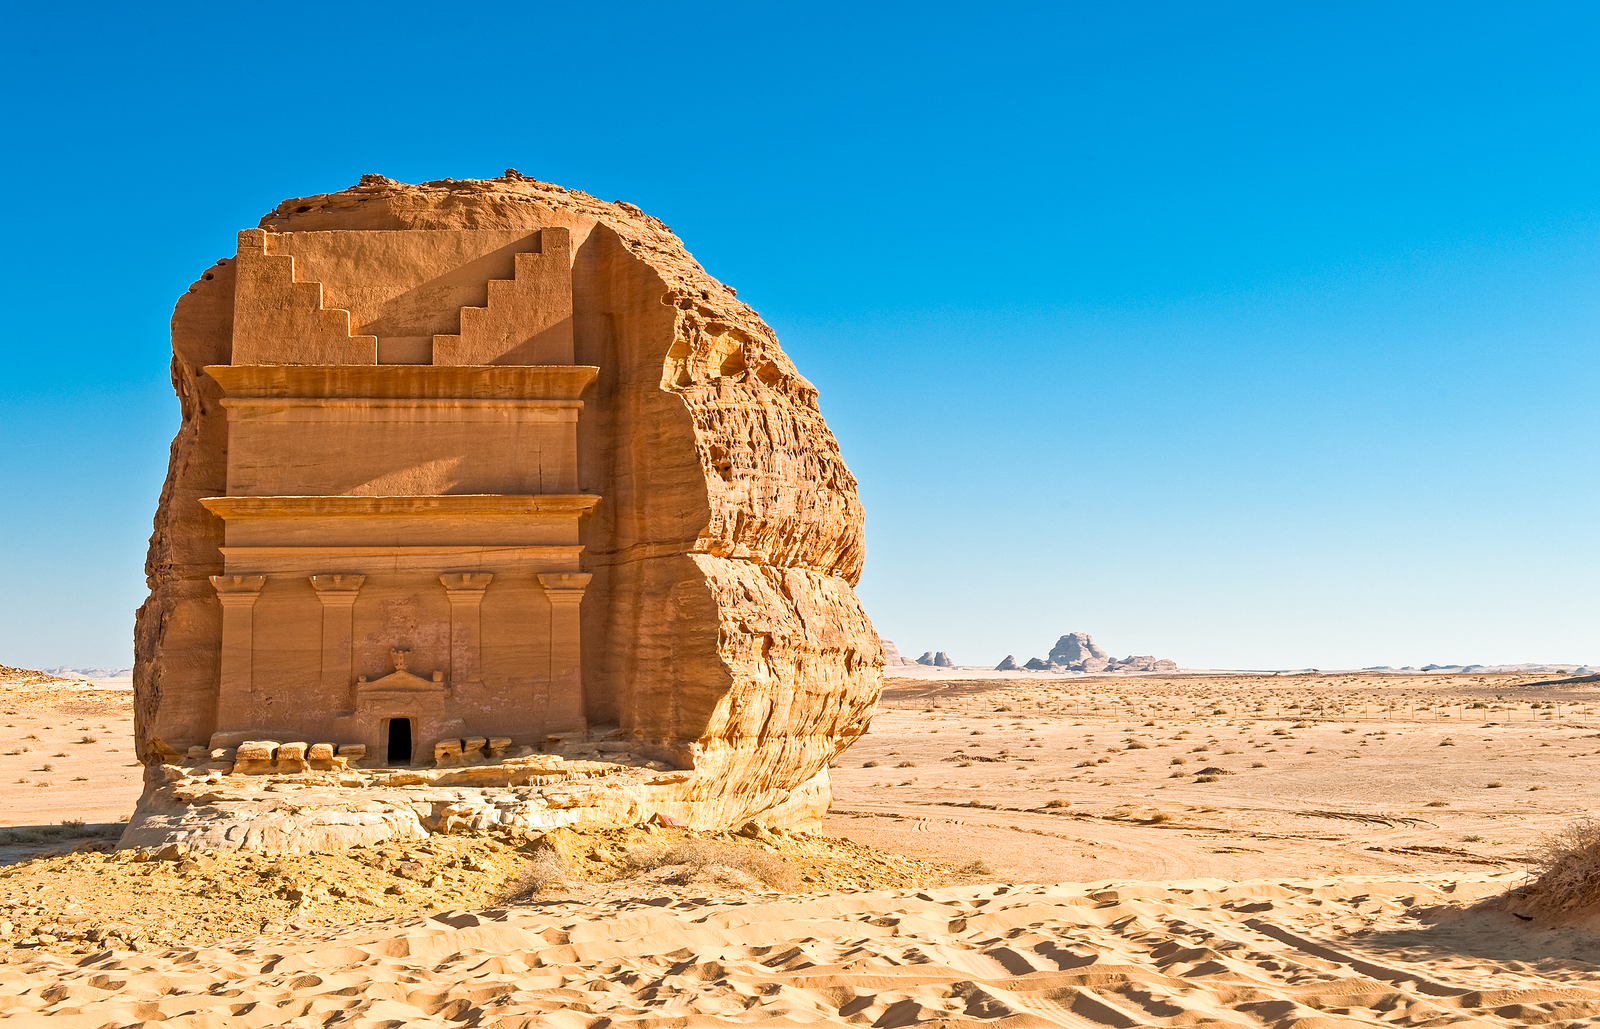 Madain Saleh, the archaeological site with the Nabatean tomb of the 1st century